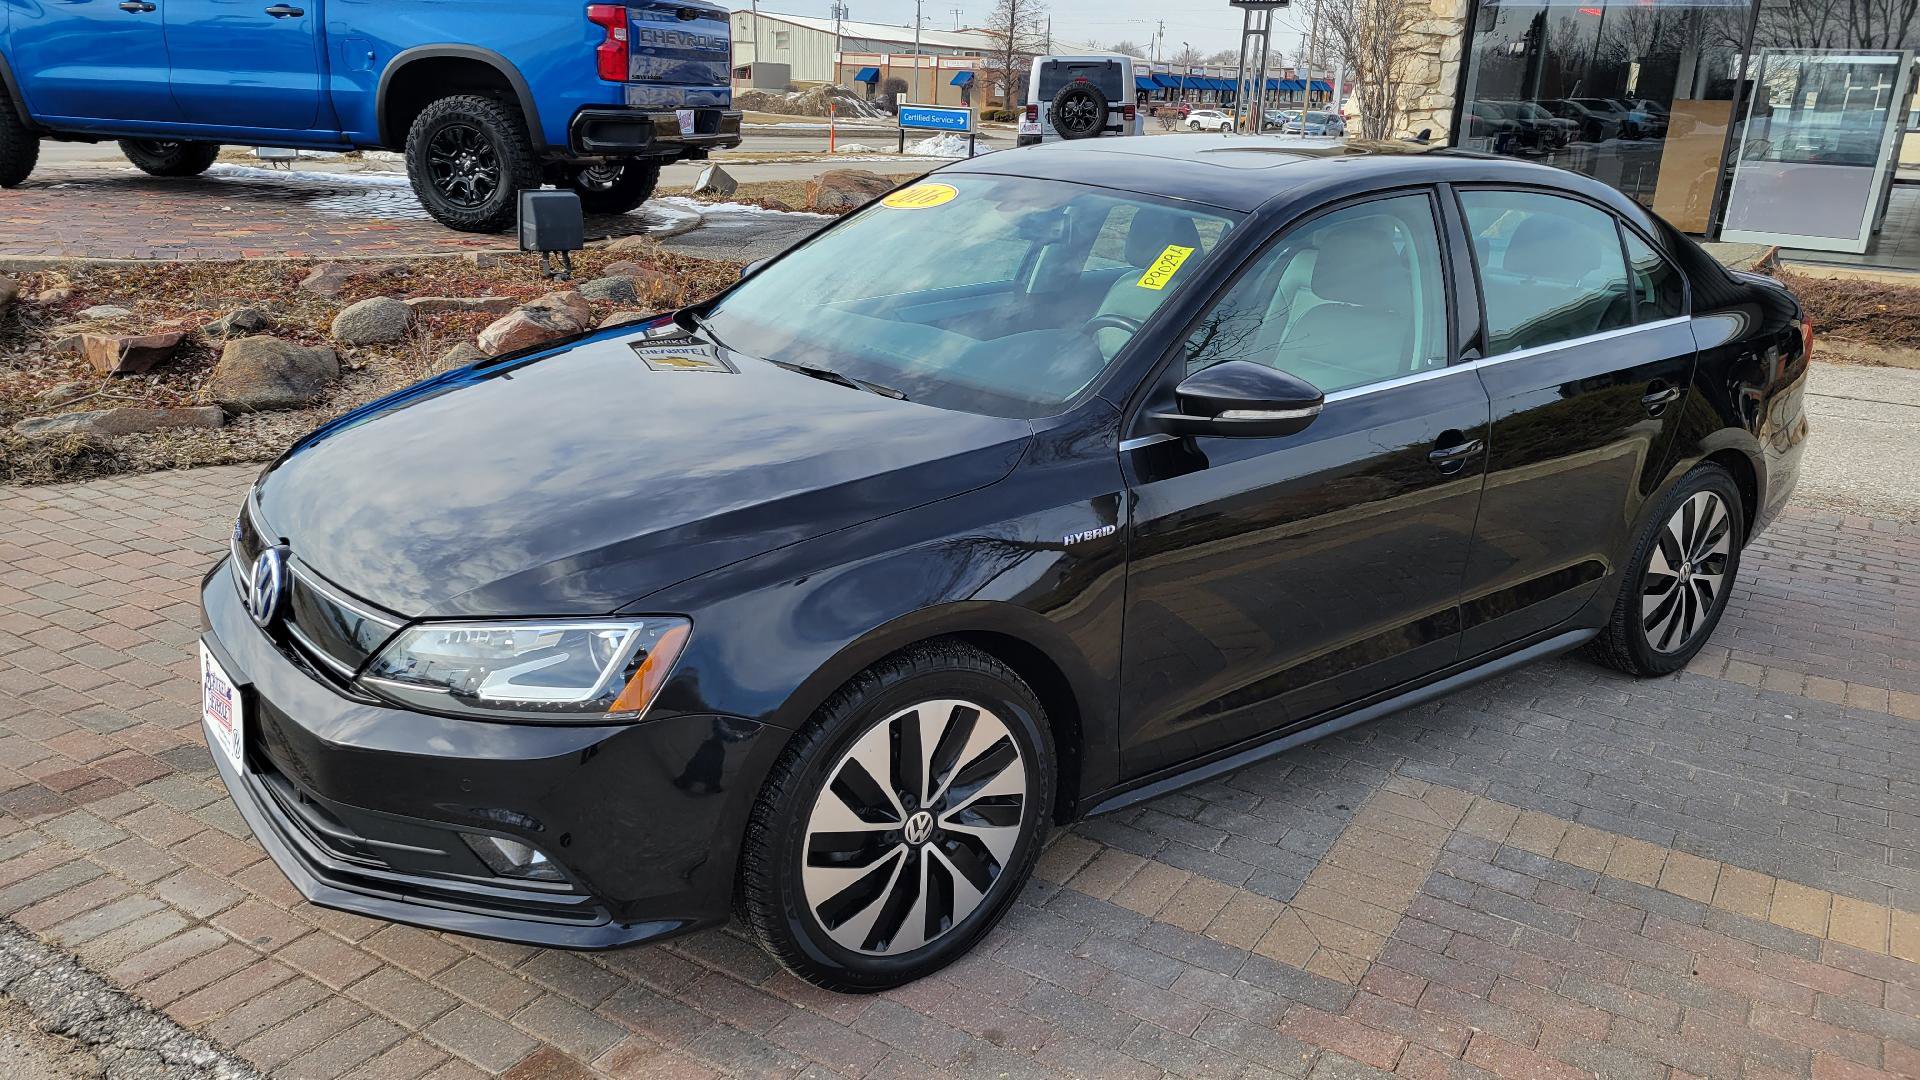 Used 2016 Volkswagen Jetta Hybrid for Sale Right Now - Autotrader